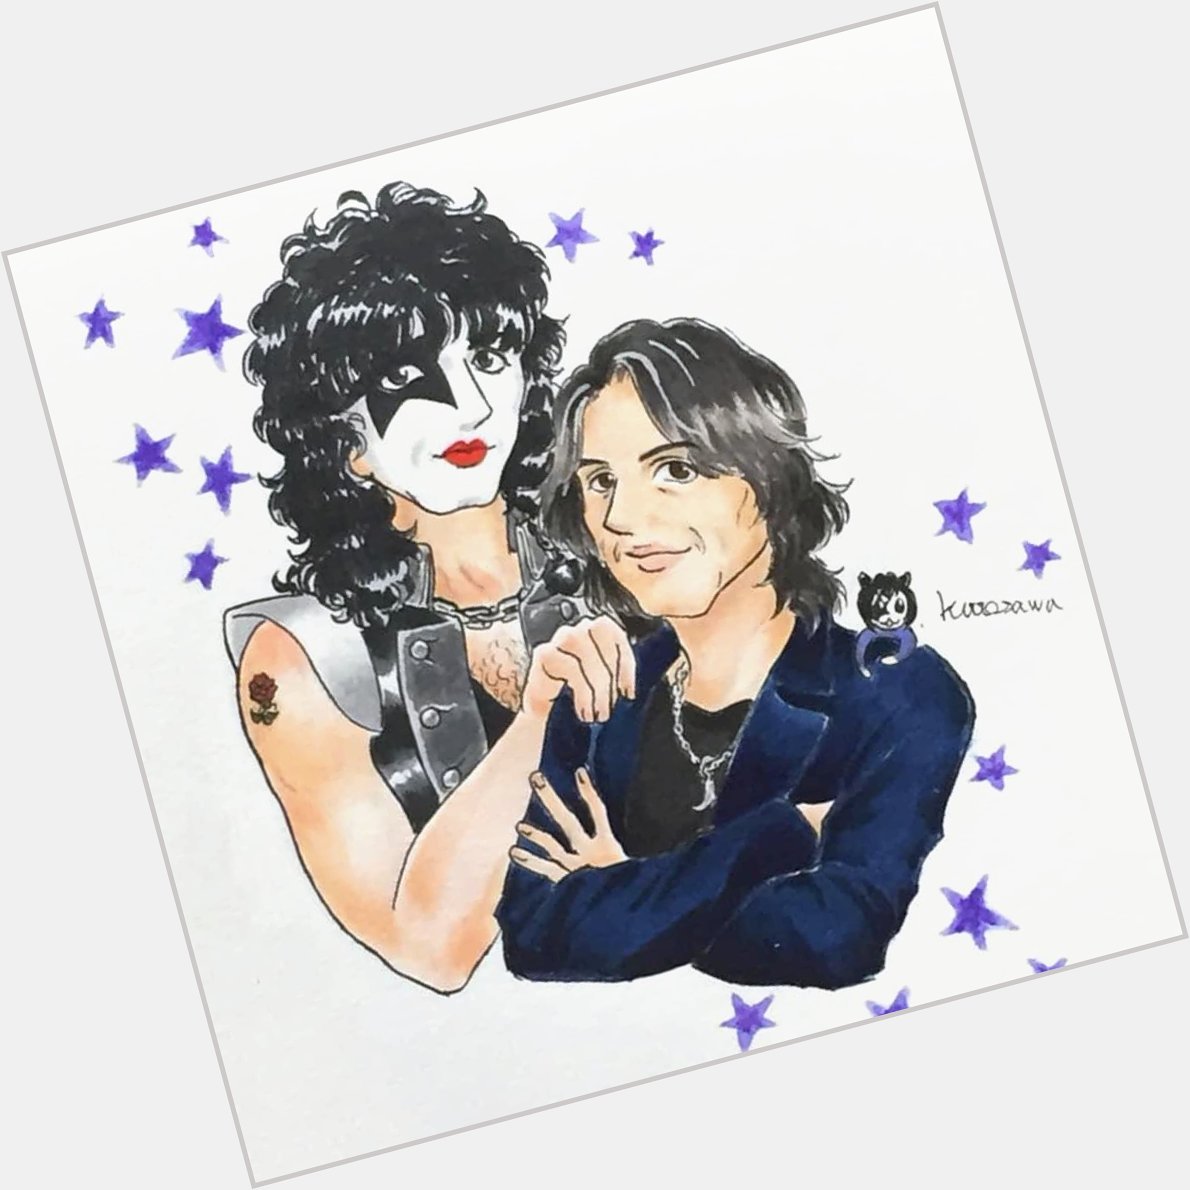 20th January
-Happy birthday Paul Stanley a.k.a The Starchild from KISS    